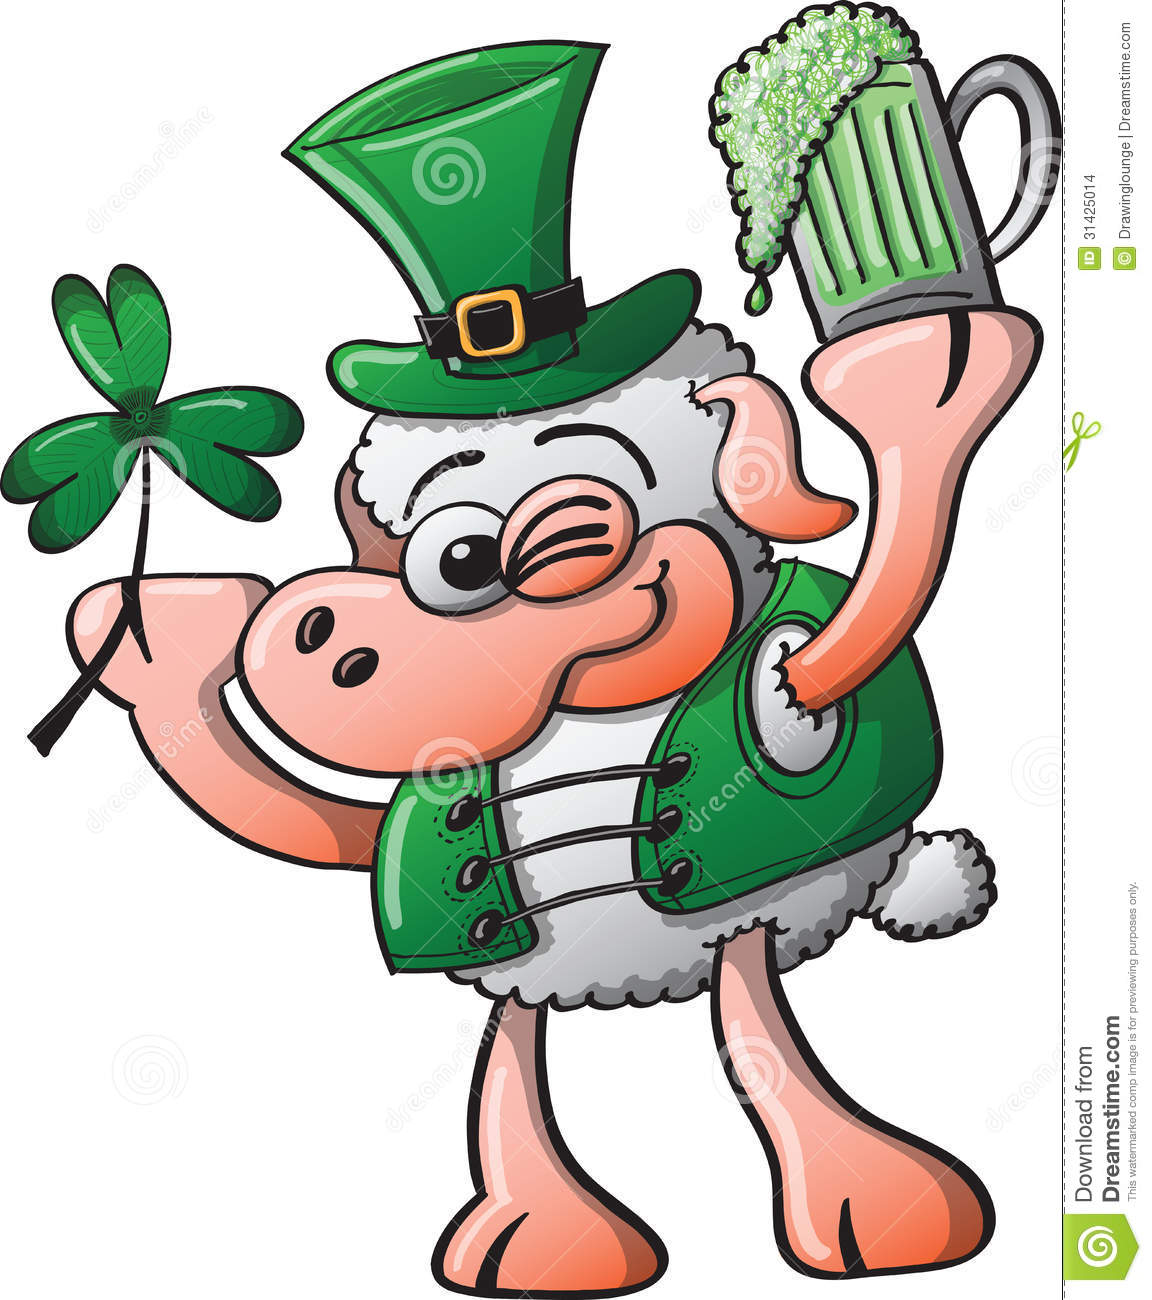 St Paddys Day Sheep Winking Smiling And Holding A Clover And A Glass